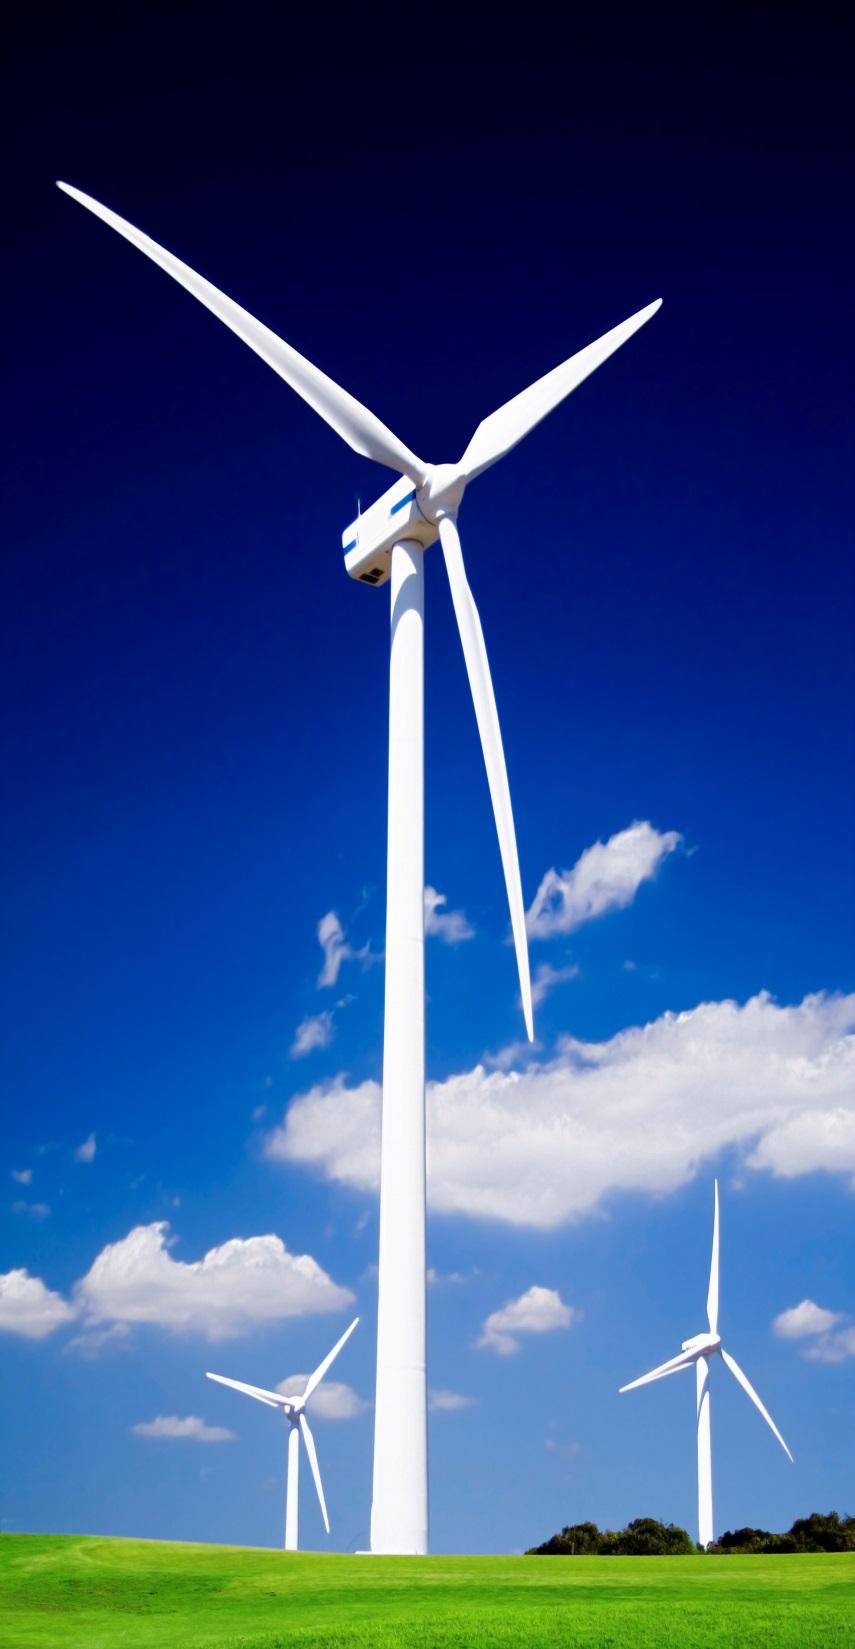 Collaborative: Achieving a Sustainable Energy Pathway for Wind Turbine Blade